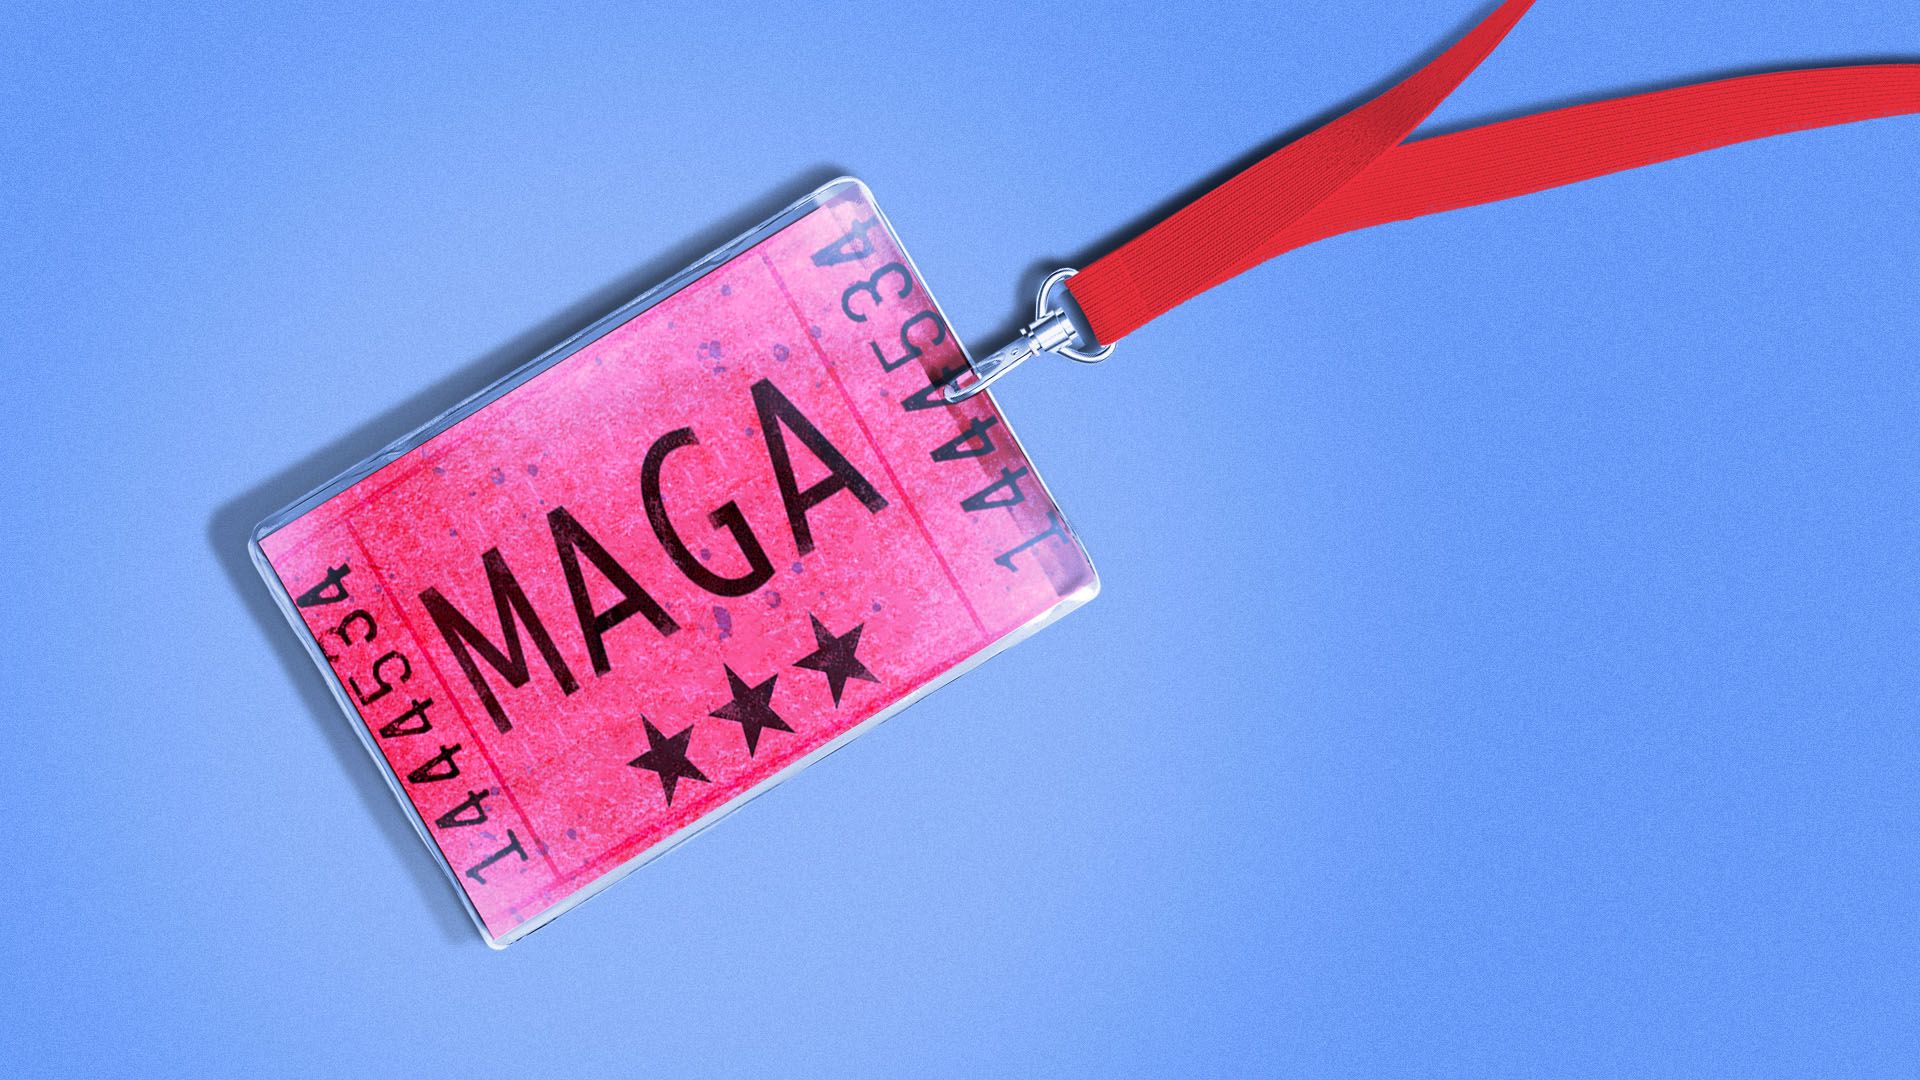 Illustration of a VIP festival ticket with the words "MAGA" on it.